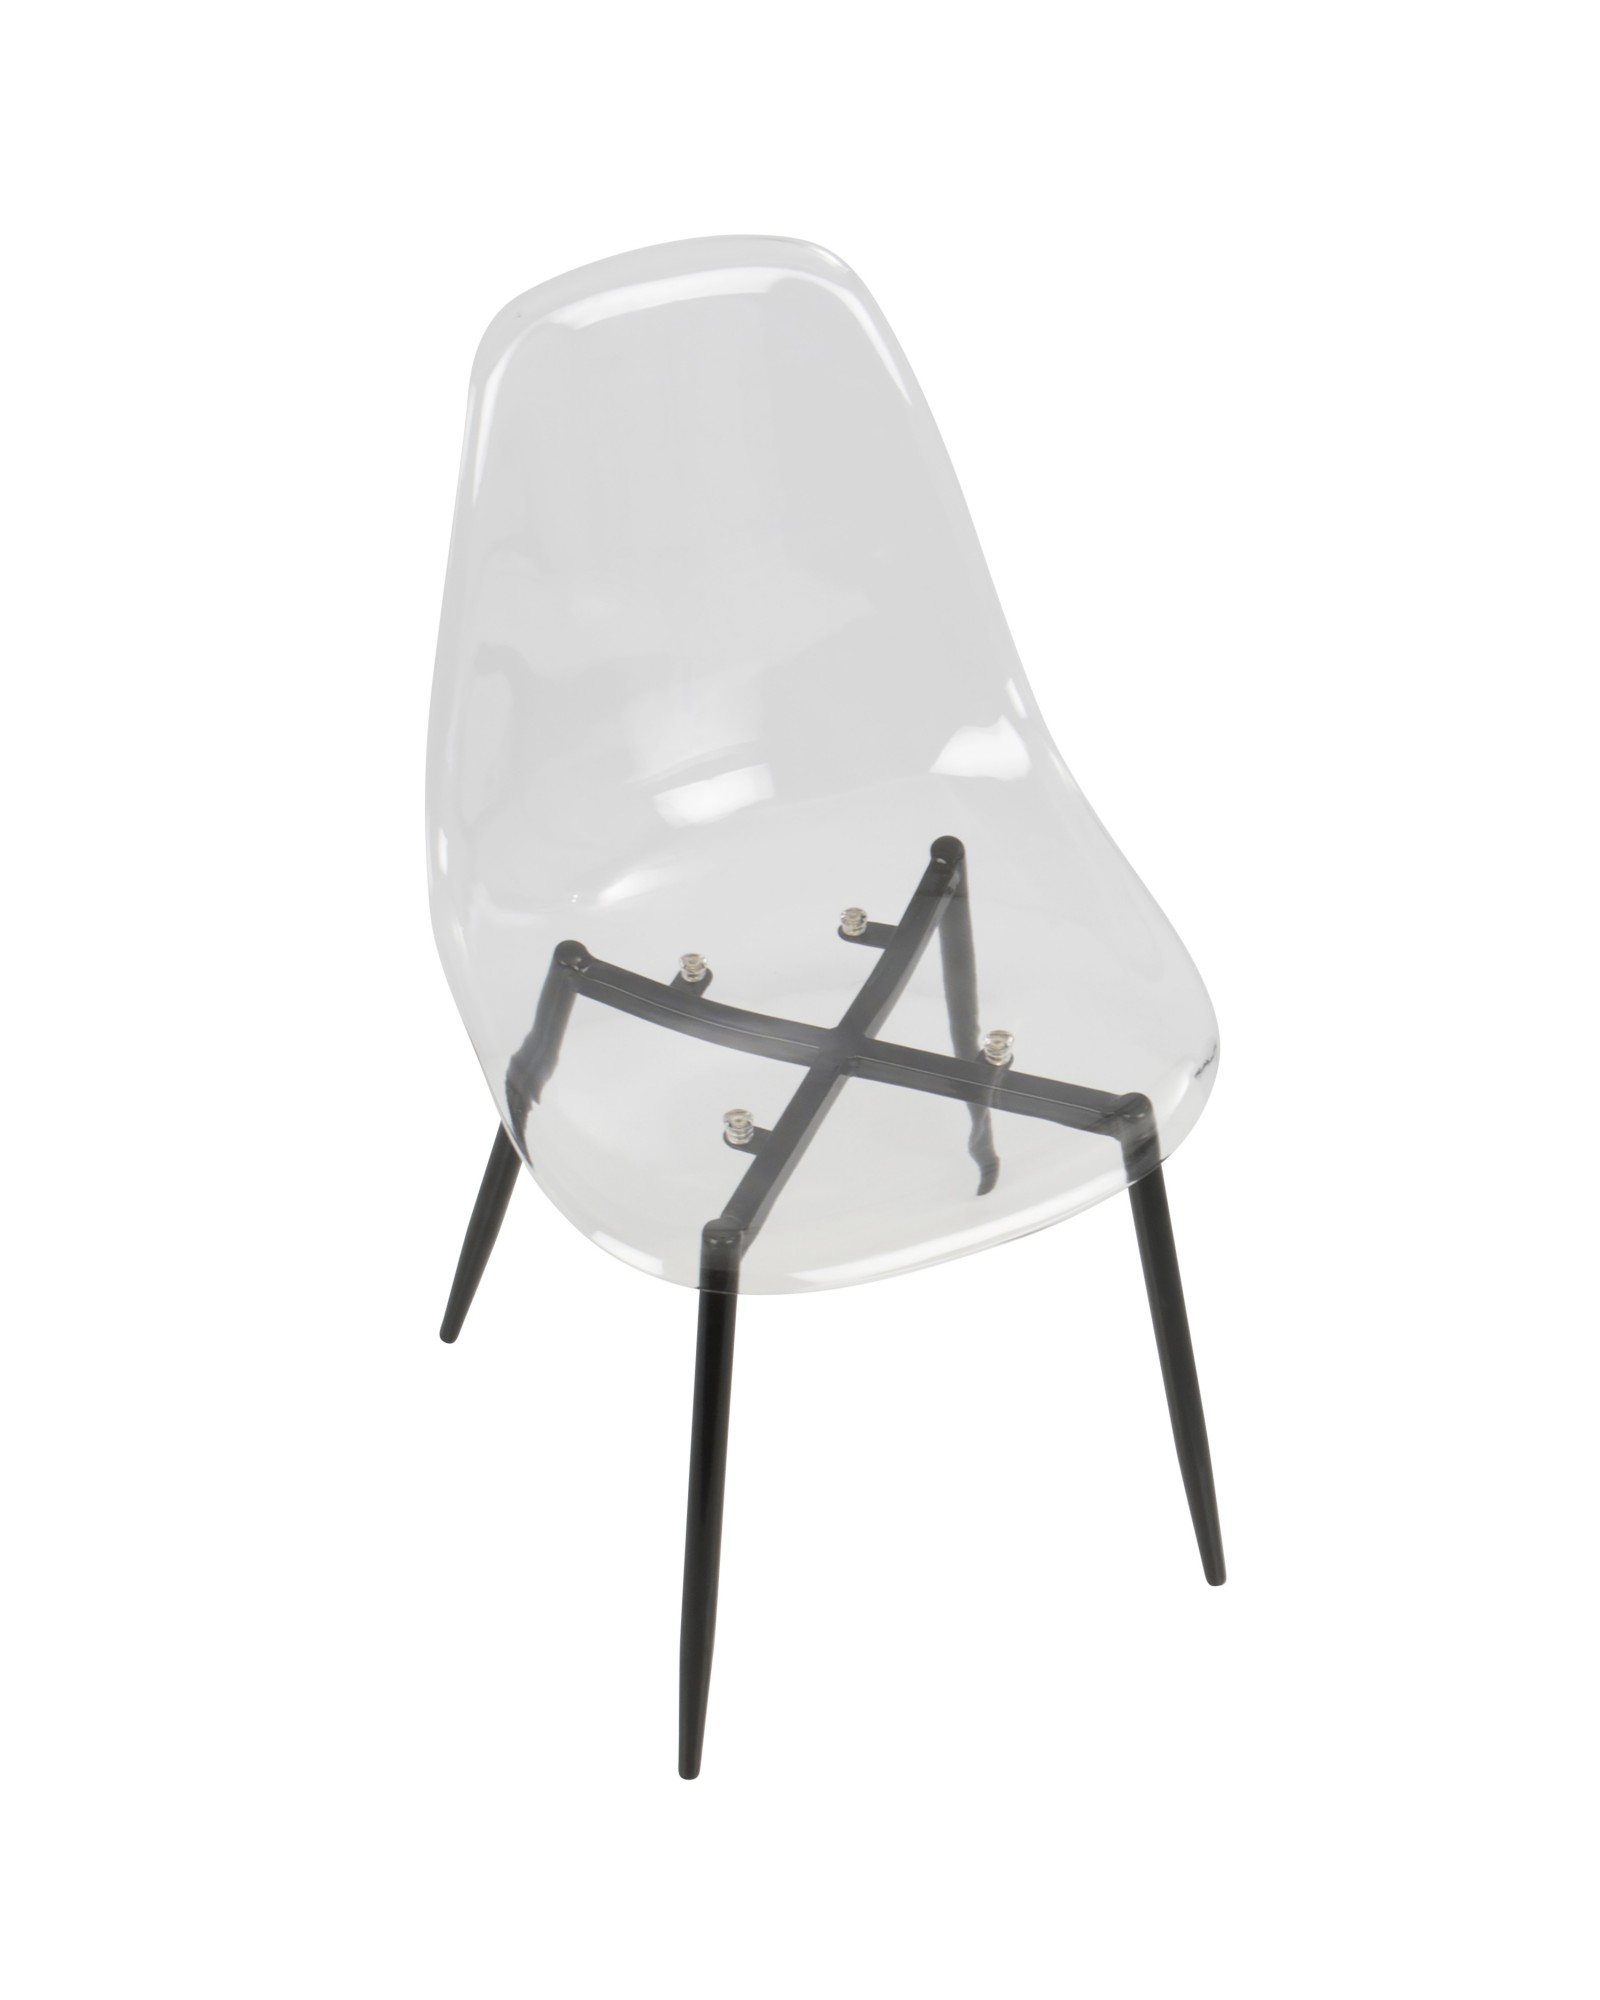 Clara Mid-Century Modern Dining Chair in Black and Clear - Set of 2